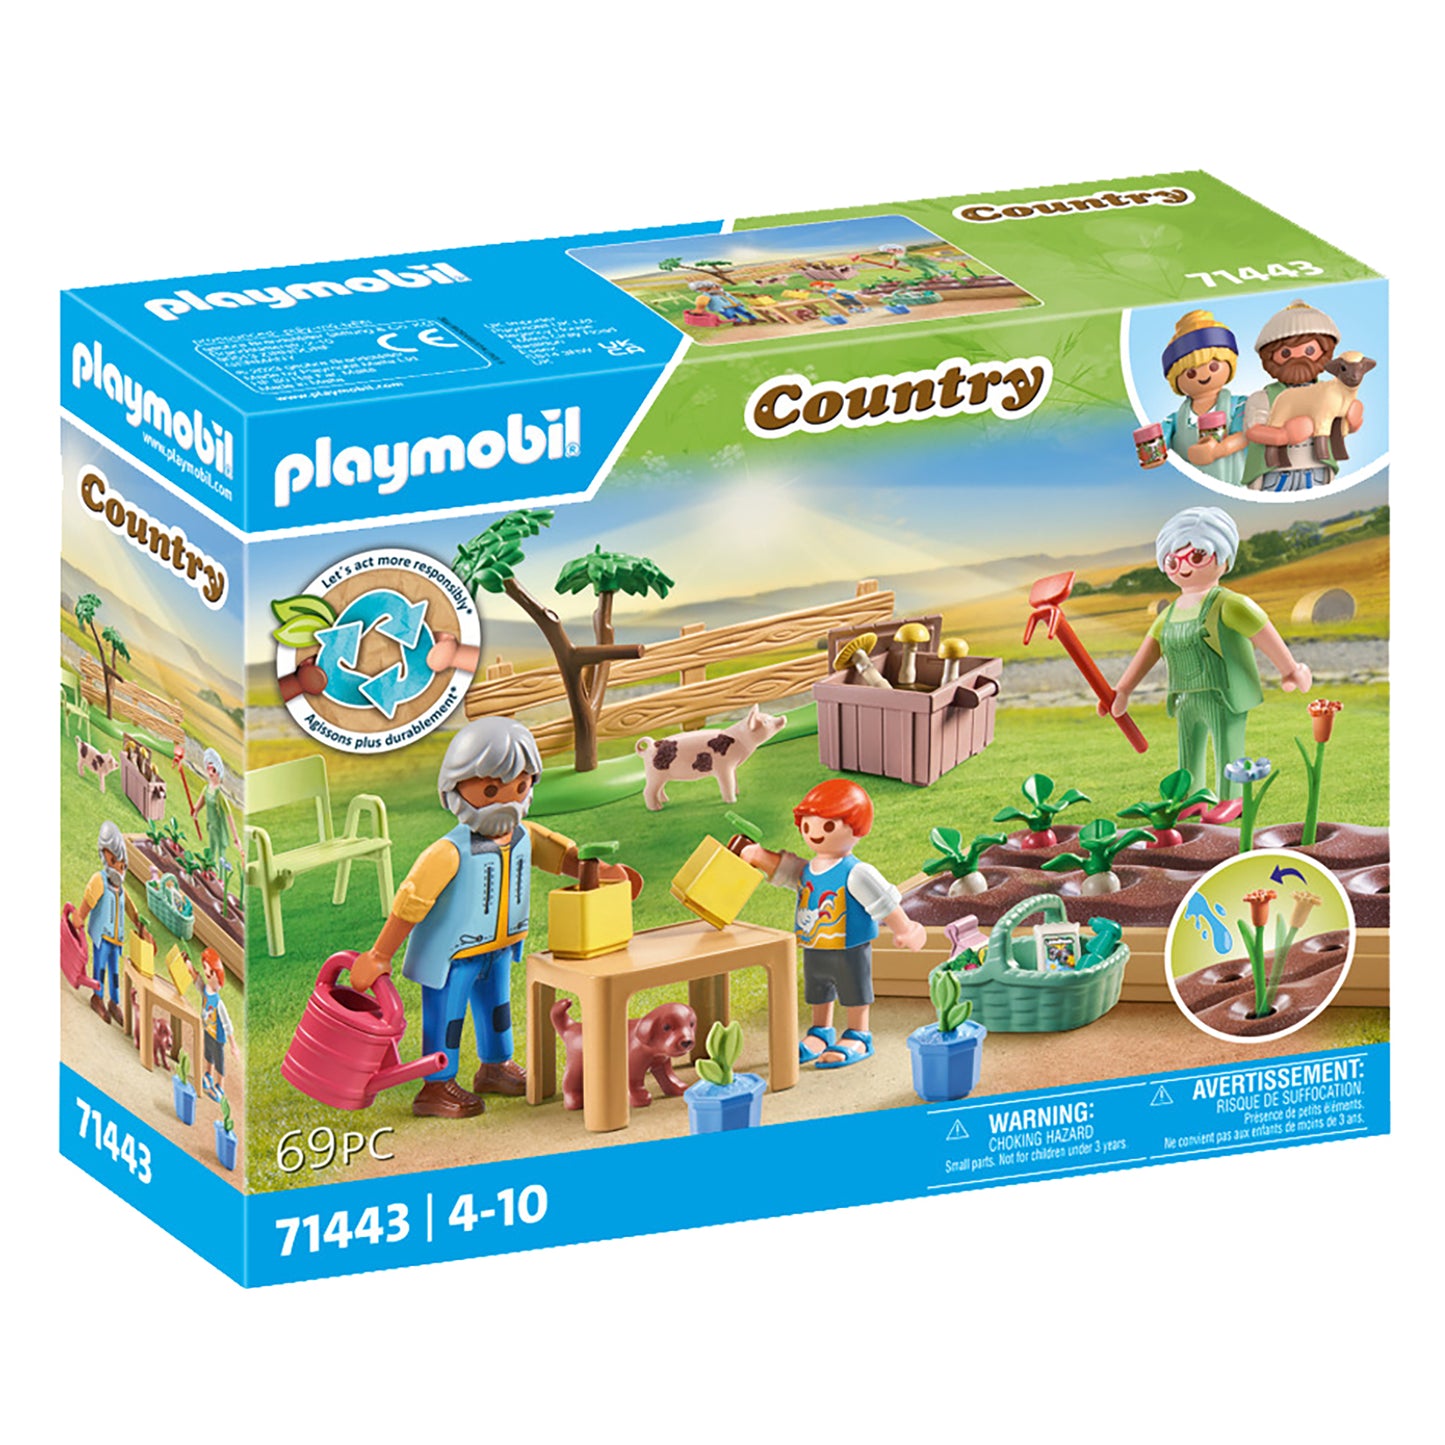 Vegetable Garden with Grandparents | Country | Eco-Plastic | Open-Ended Play For Kids